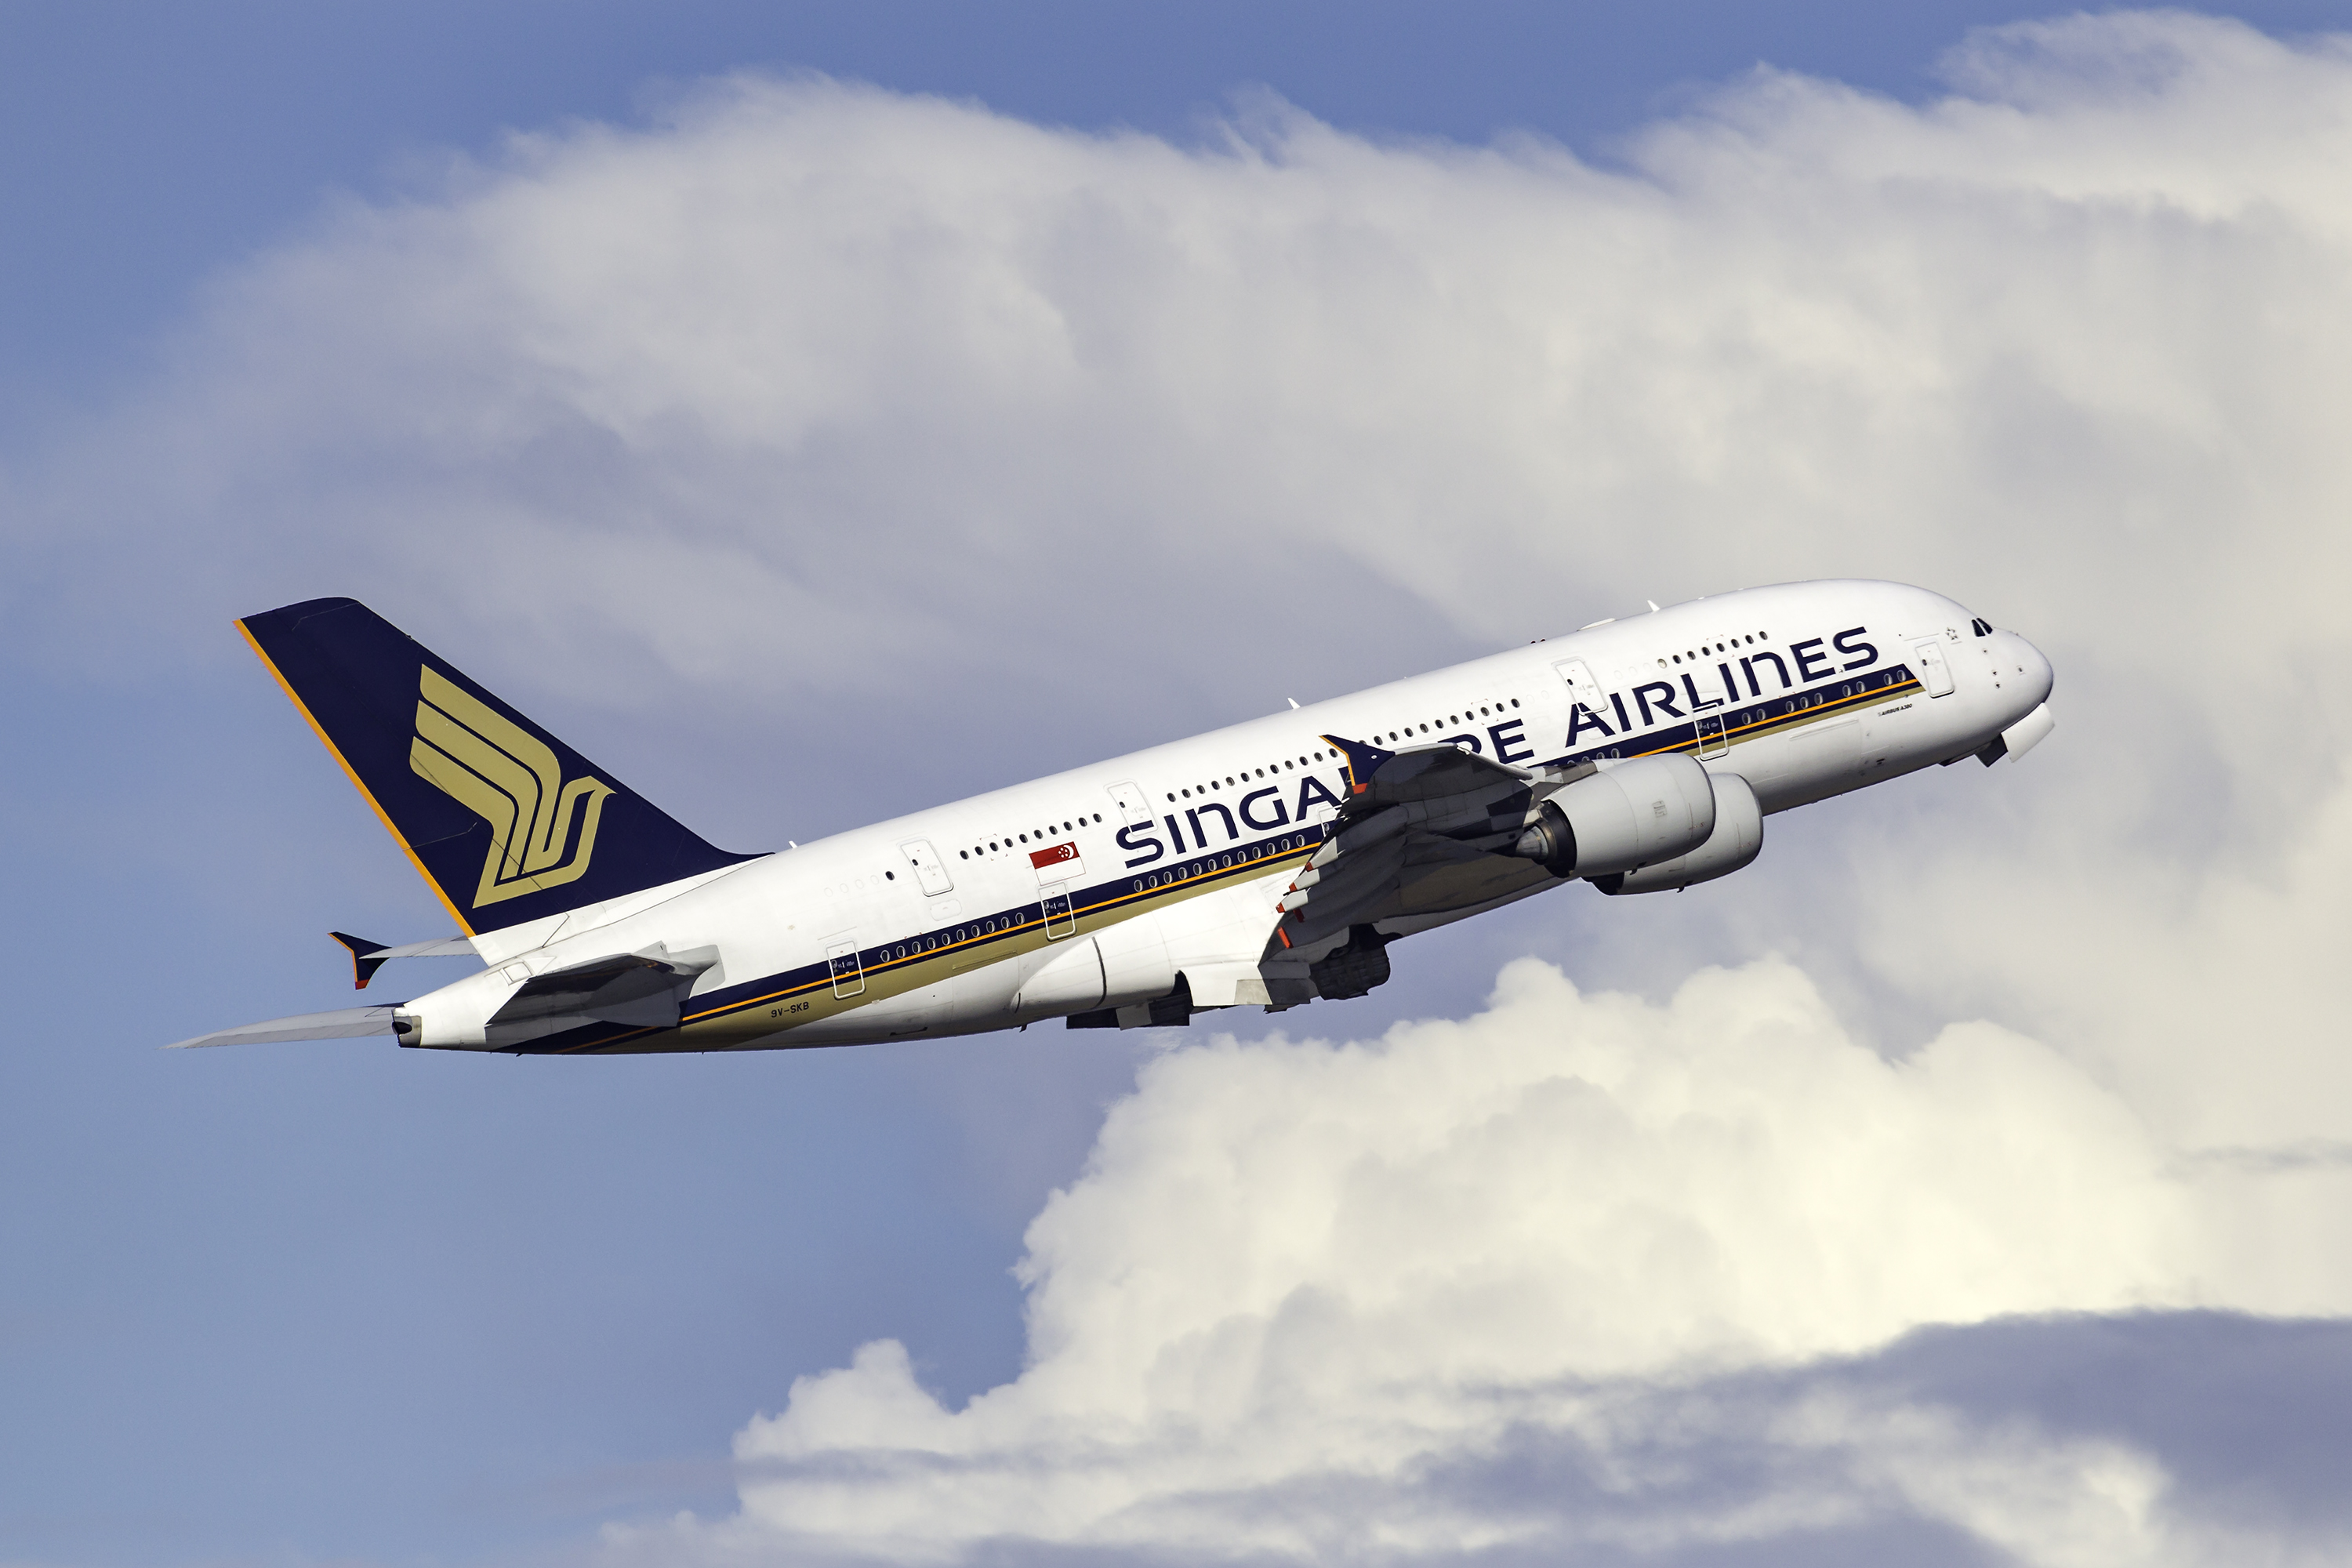 TRB Lightweight Structures has supplied a range of panels to make luxury suites for the interior of Singapore Airlines’ aircraft.